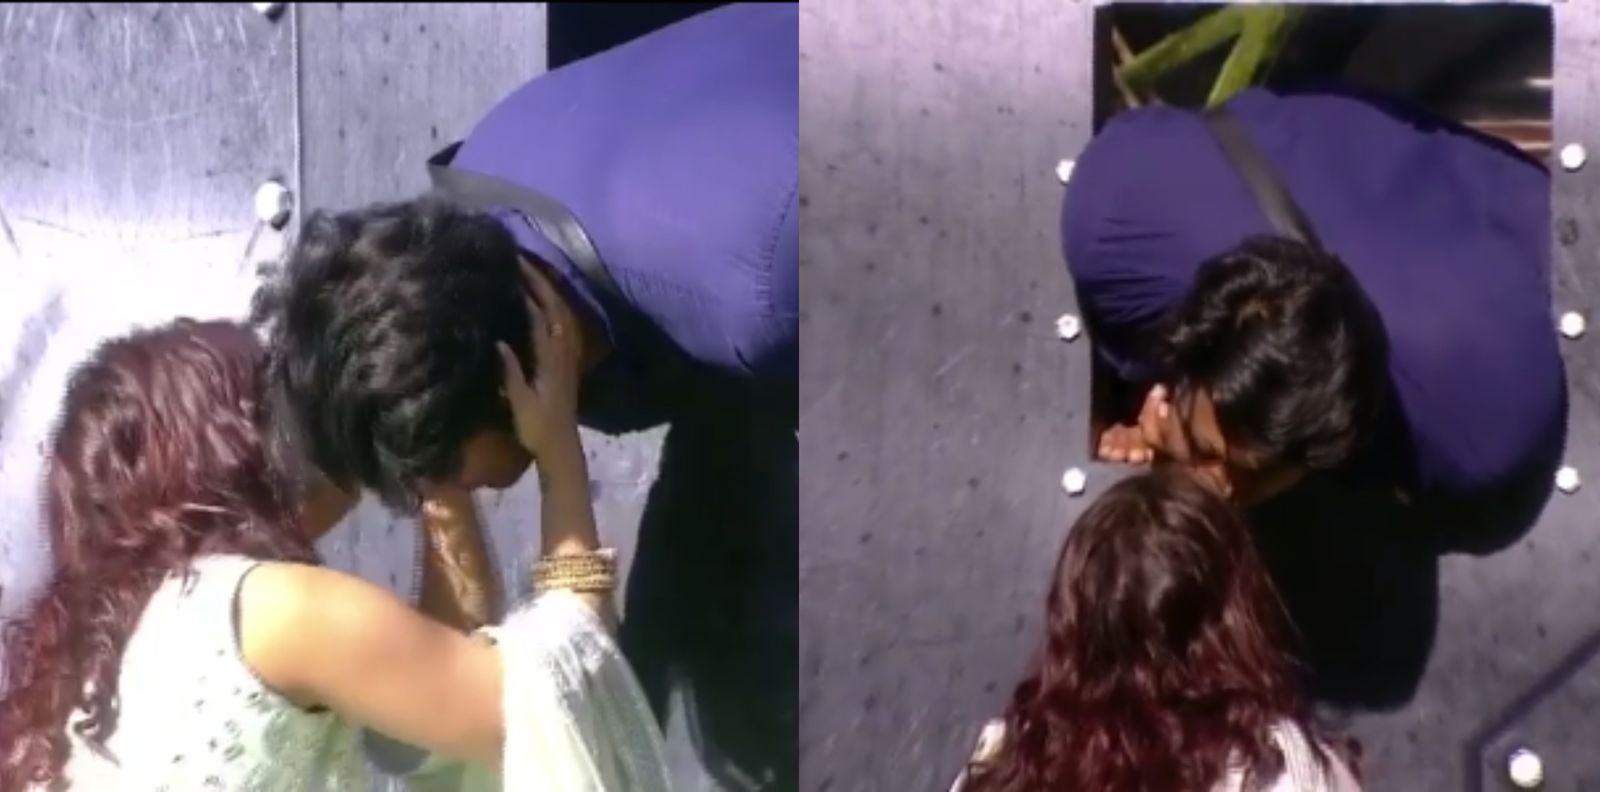 Bigg Boss Preview: Sidharth Shukla And Shehnaaz Gill Go Lovey-Dovey Again, Will Be Seen Kissing And Making Up!